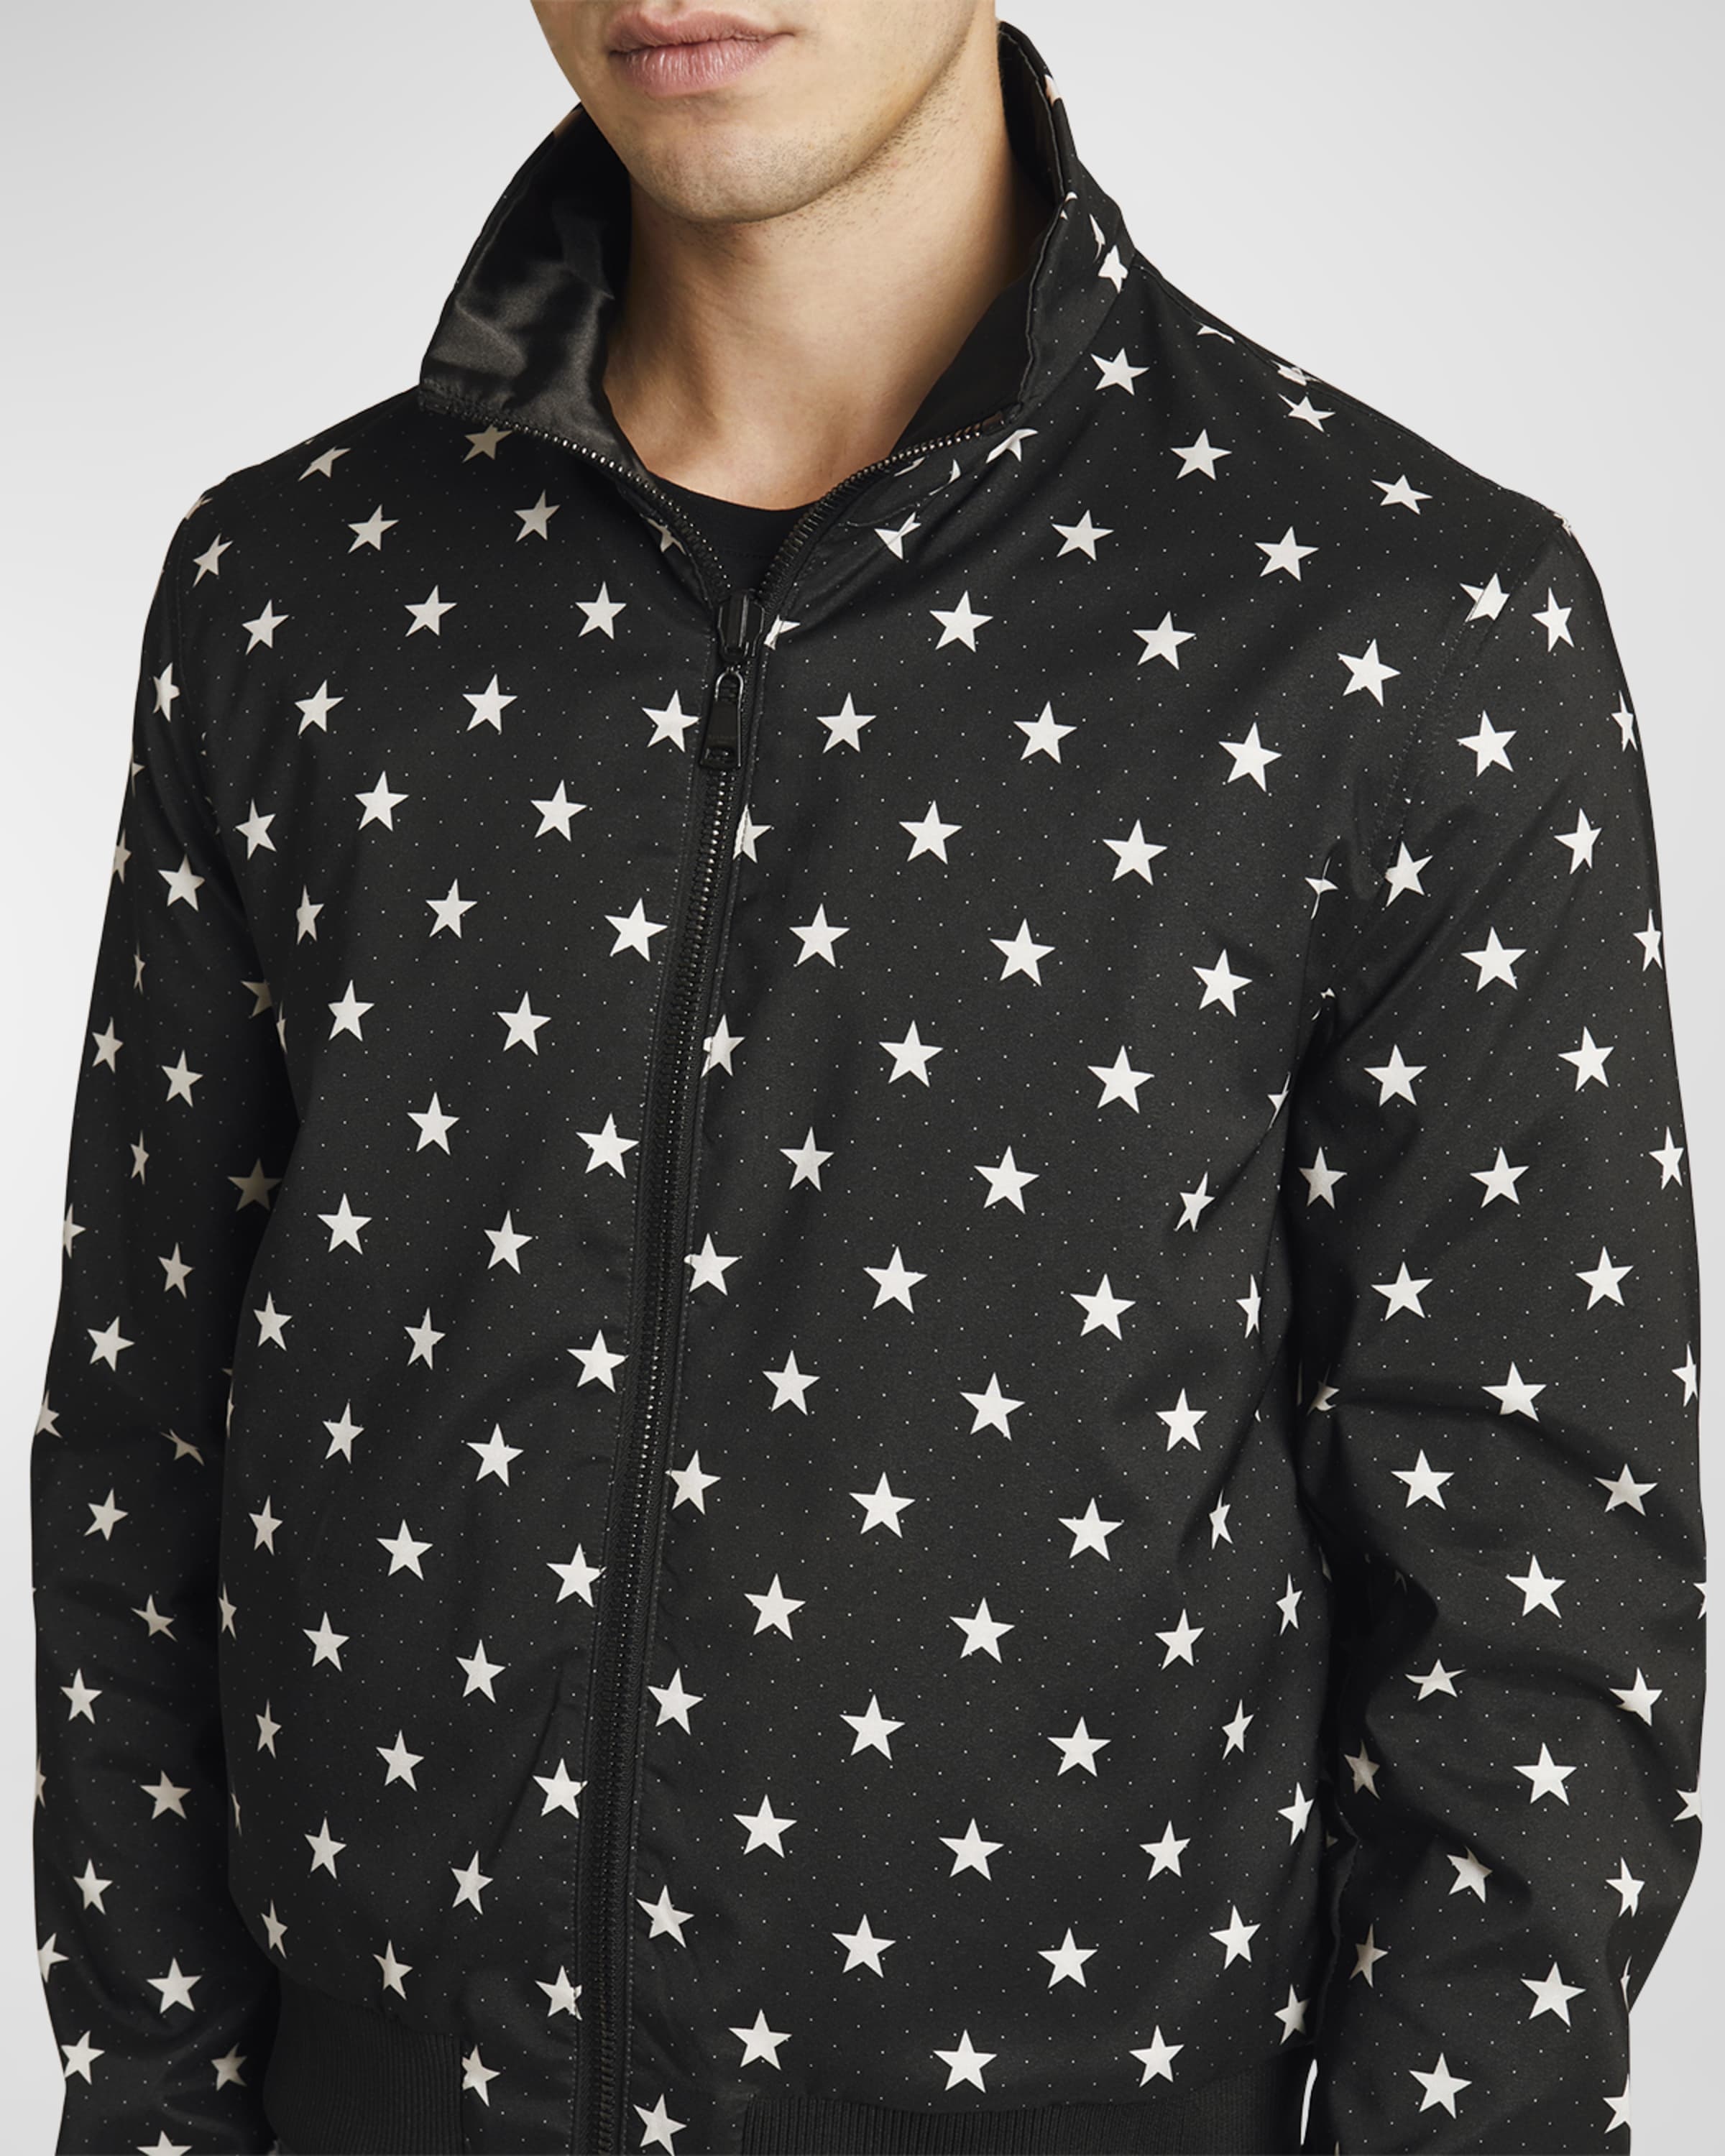 Men's Reversible Western Cut and Star Bomber Jacket - 6